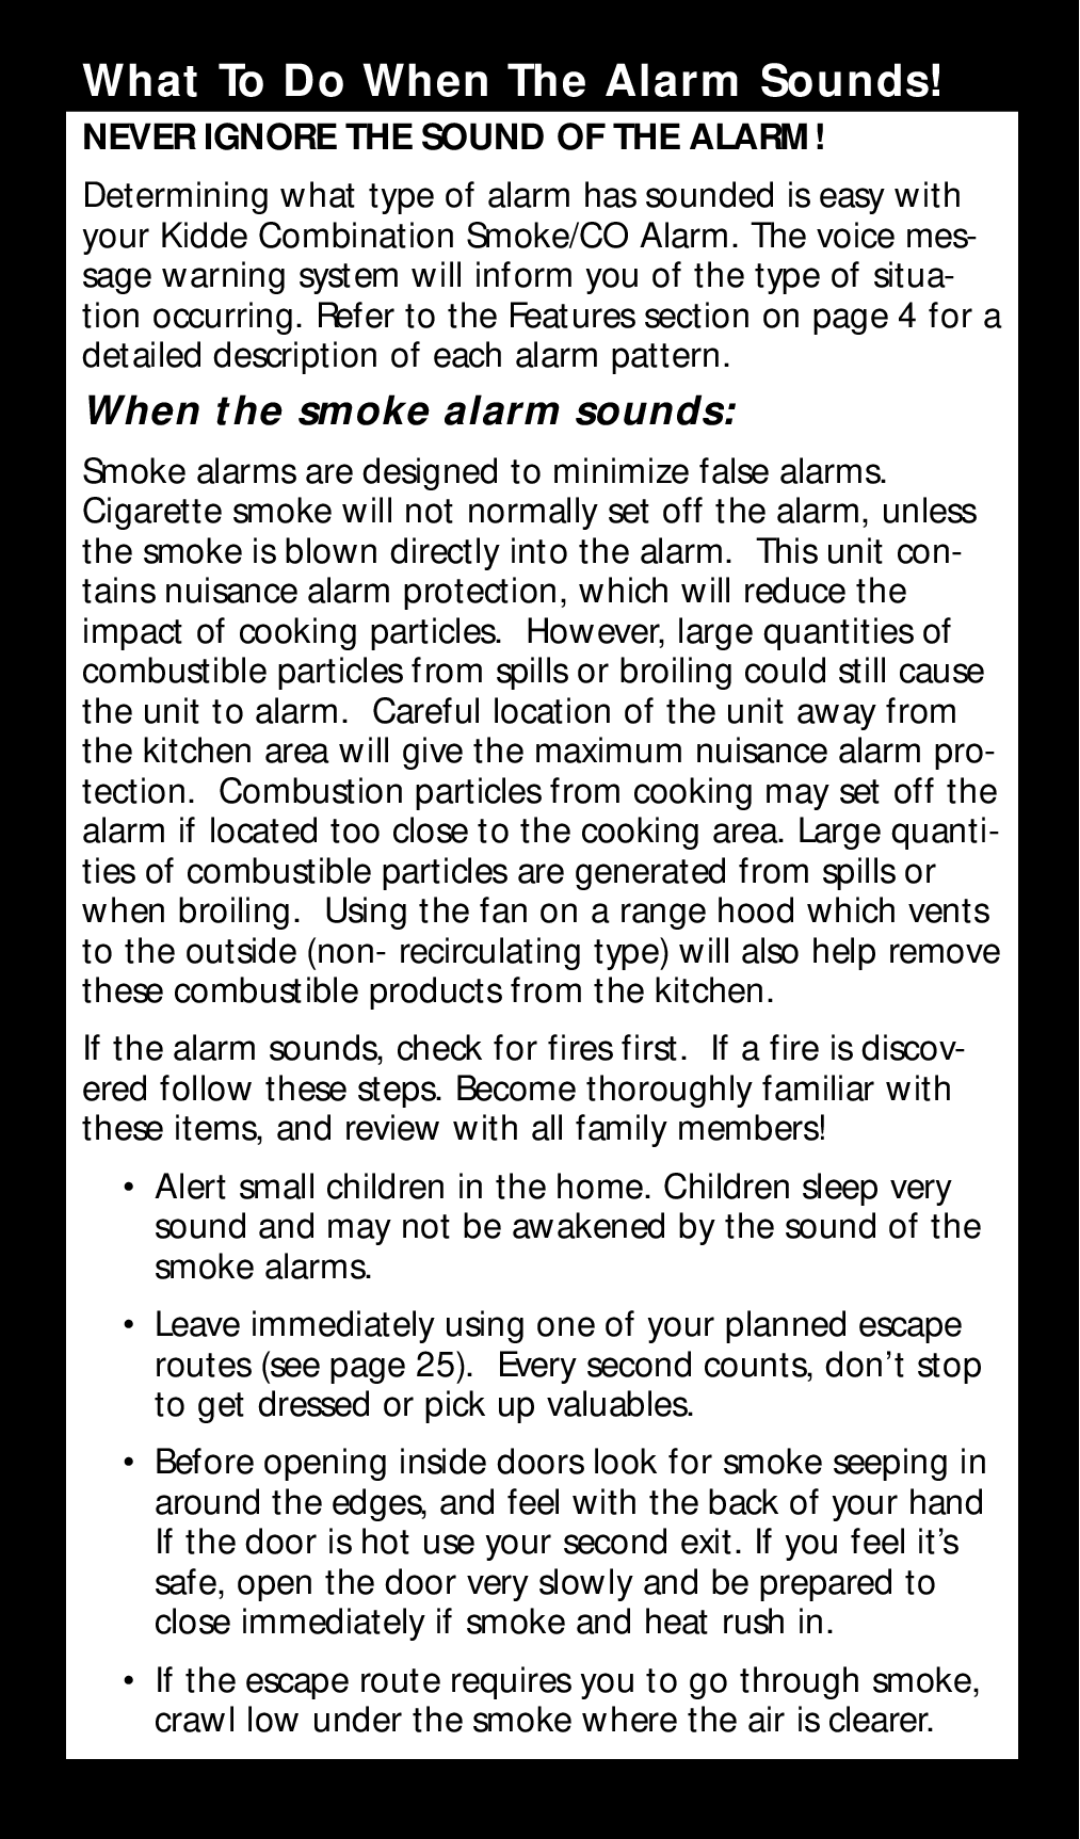 Kidde KN-COPE-I manual When the smoke alarm sounds, Never Ignore The Sound Of The Alarm, What To Do When The Alarm Sounds 